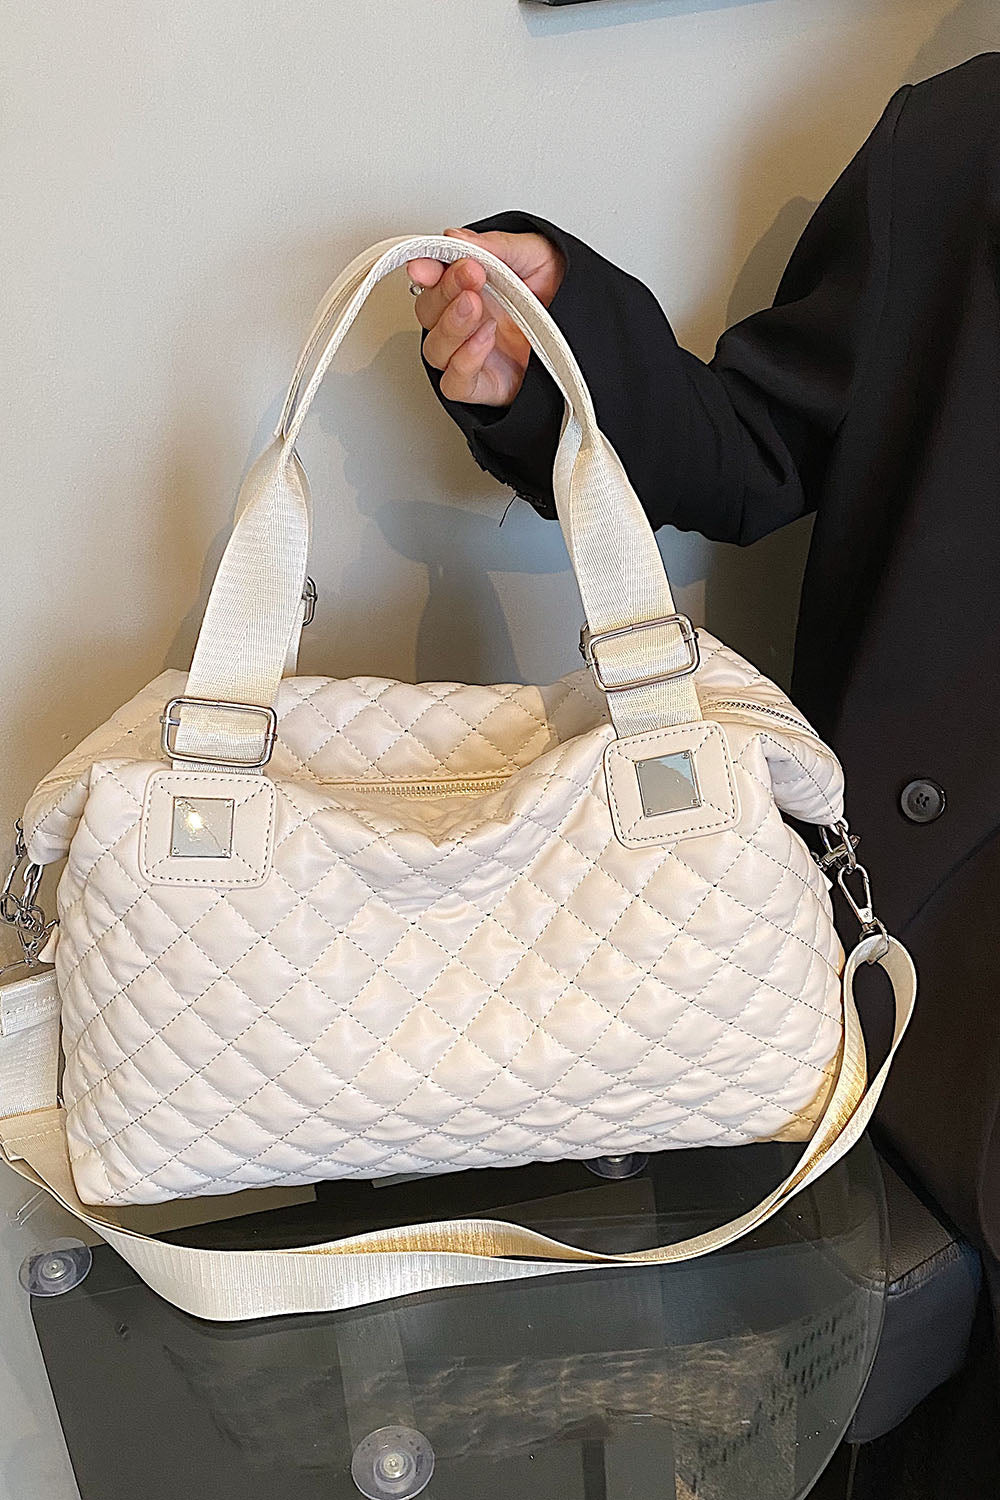 PU Leather Quilted Handbag